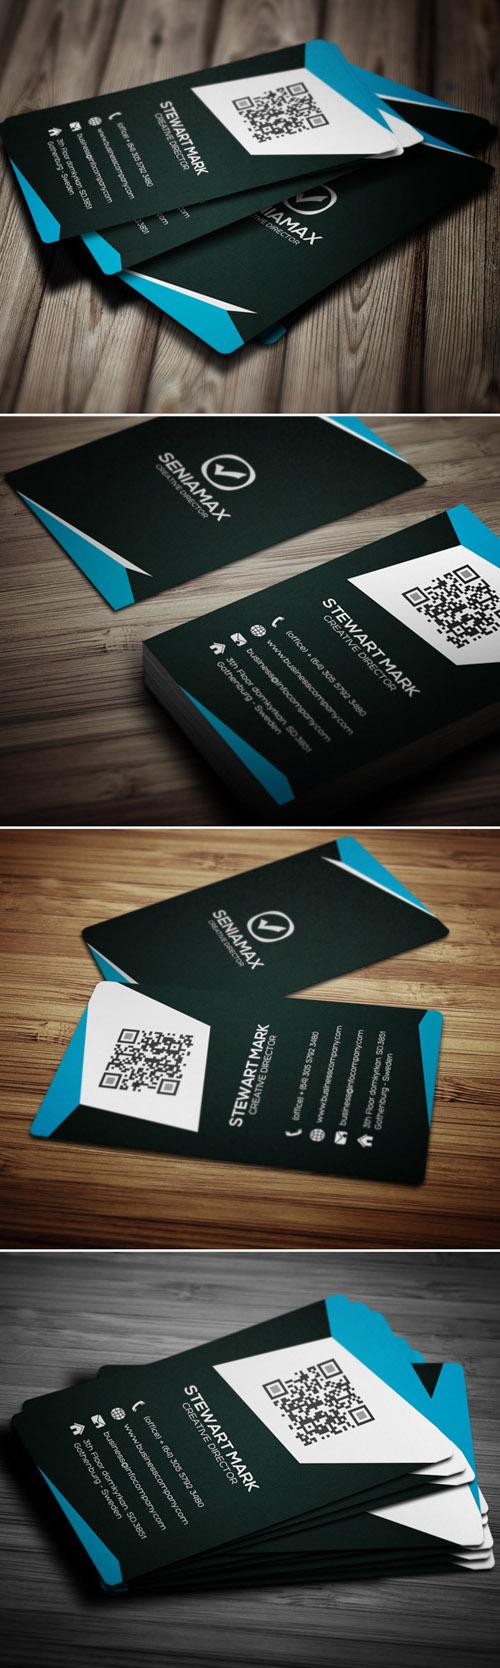 Professional Business Cards Design-18